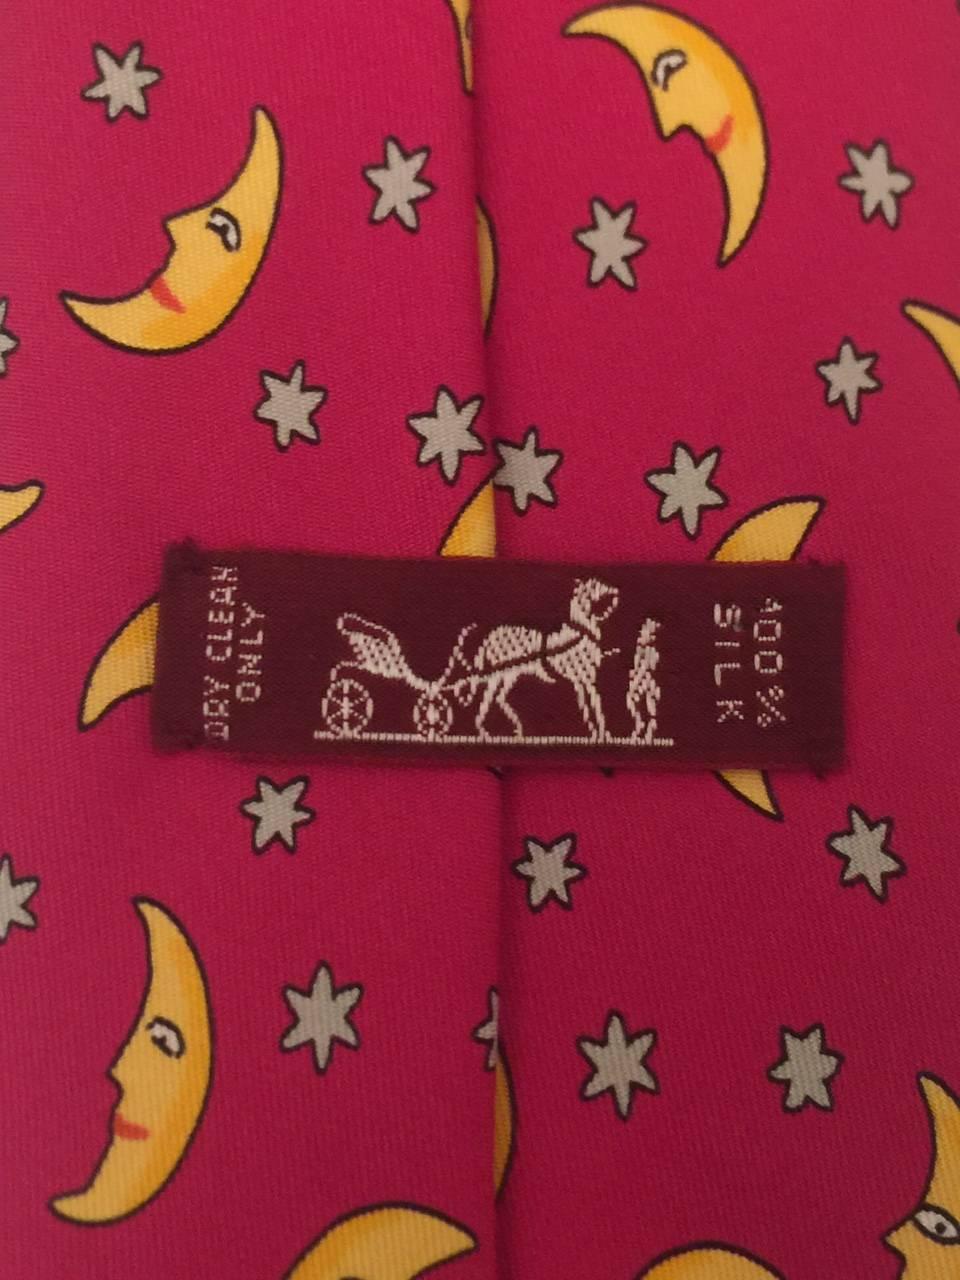 Hermes ties are world renown for quality and often whimsical designs.  This  cerise pink and vibrant yellow cravat is not exception!  This vintage Hermes tie is a must for any Hermes collector or a whimsical tie aficionado.  Excellent Condition.  